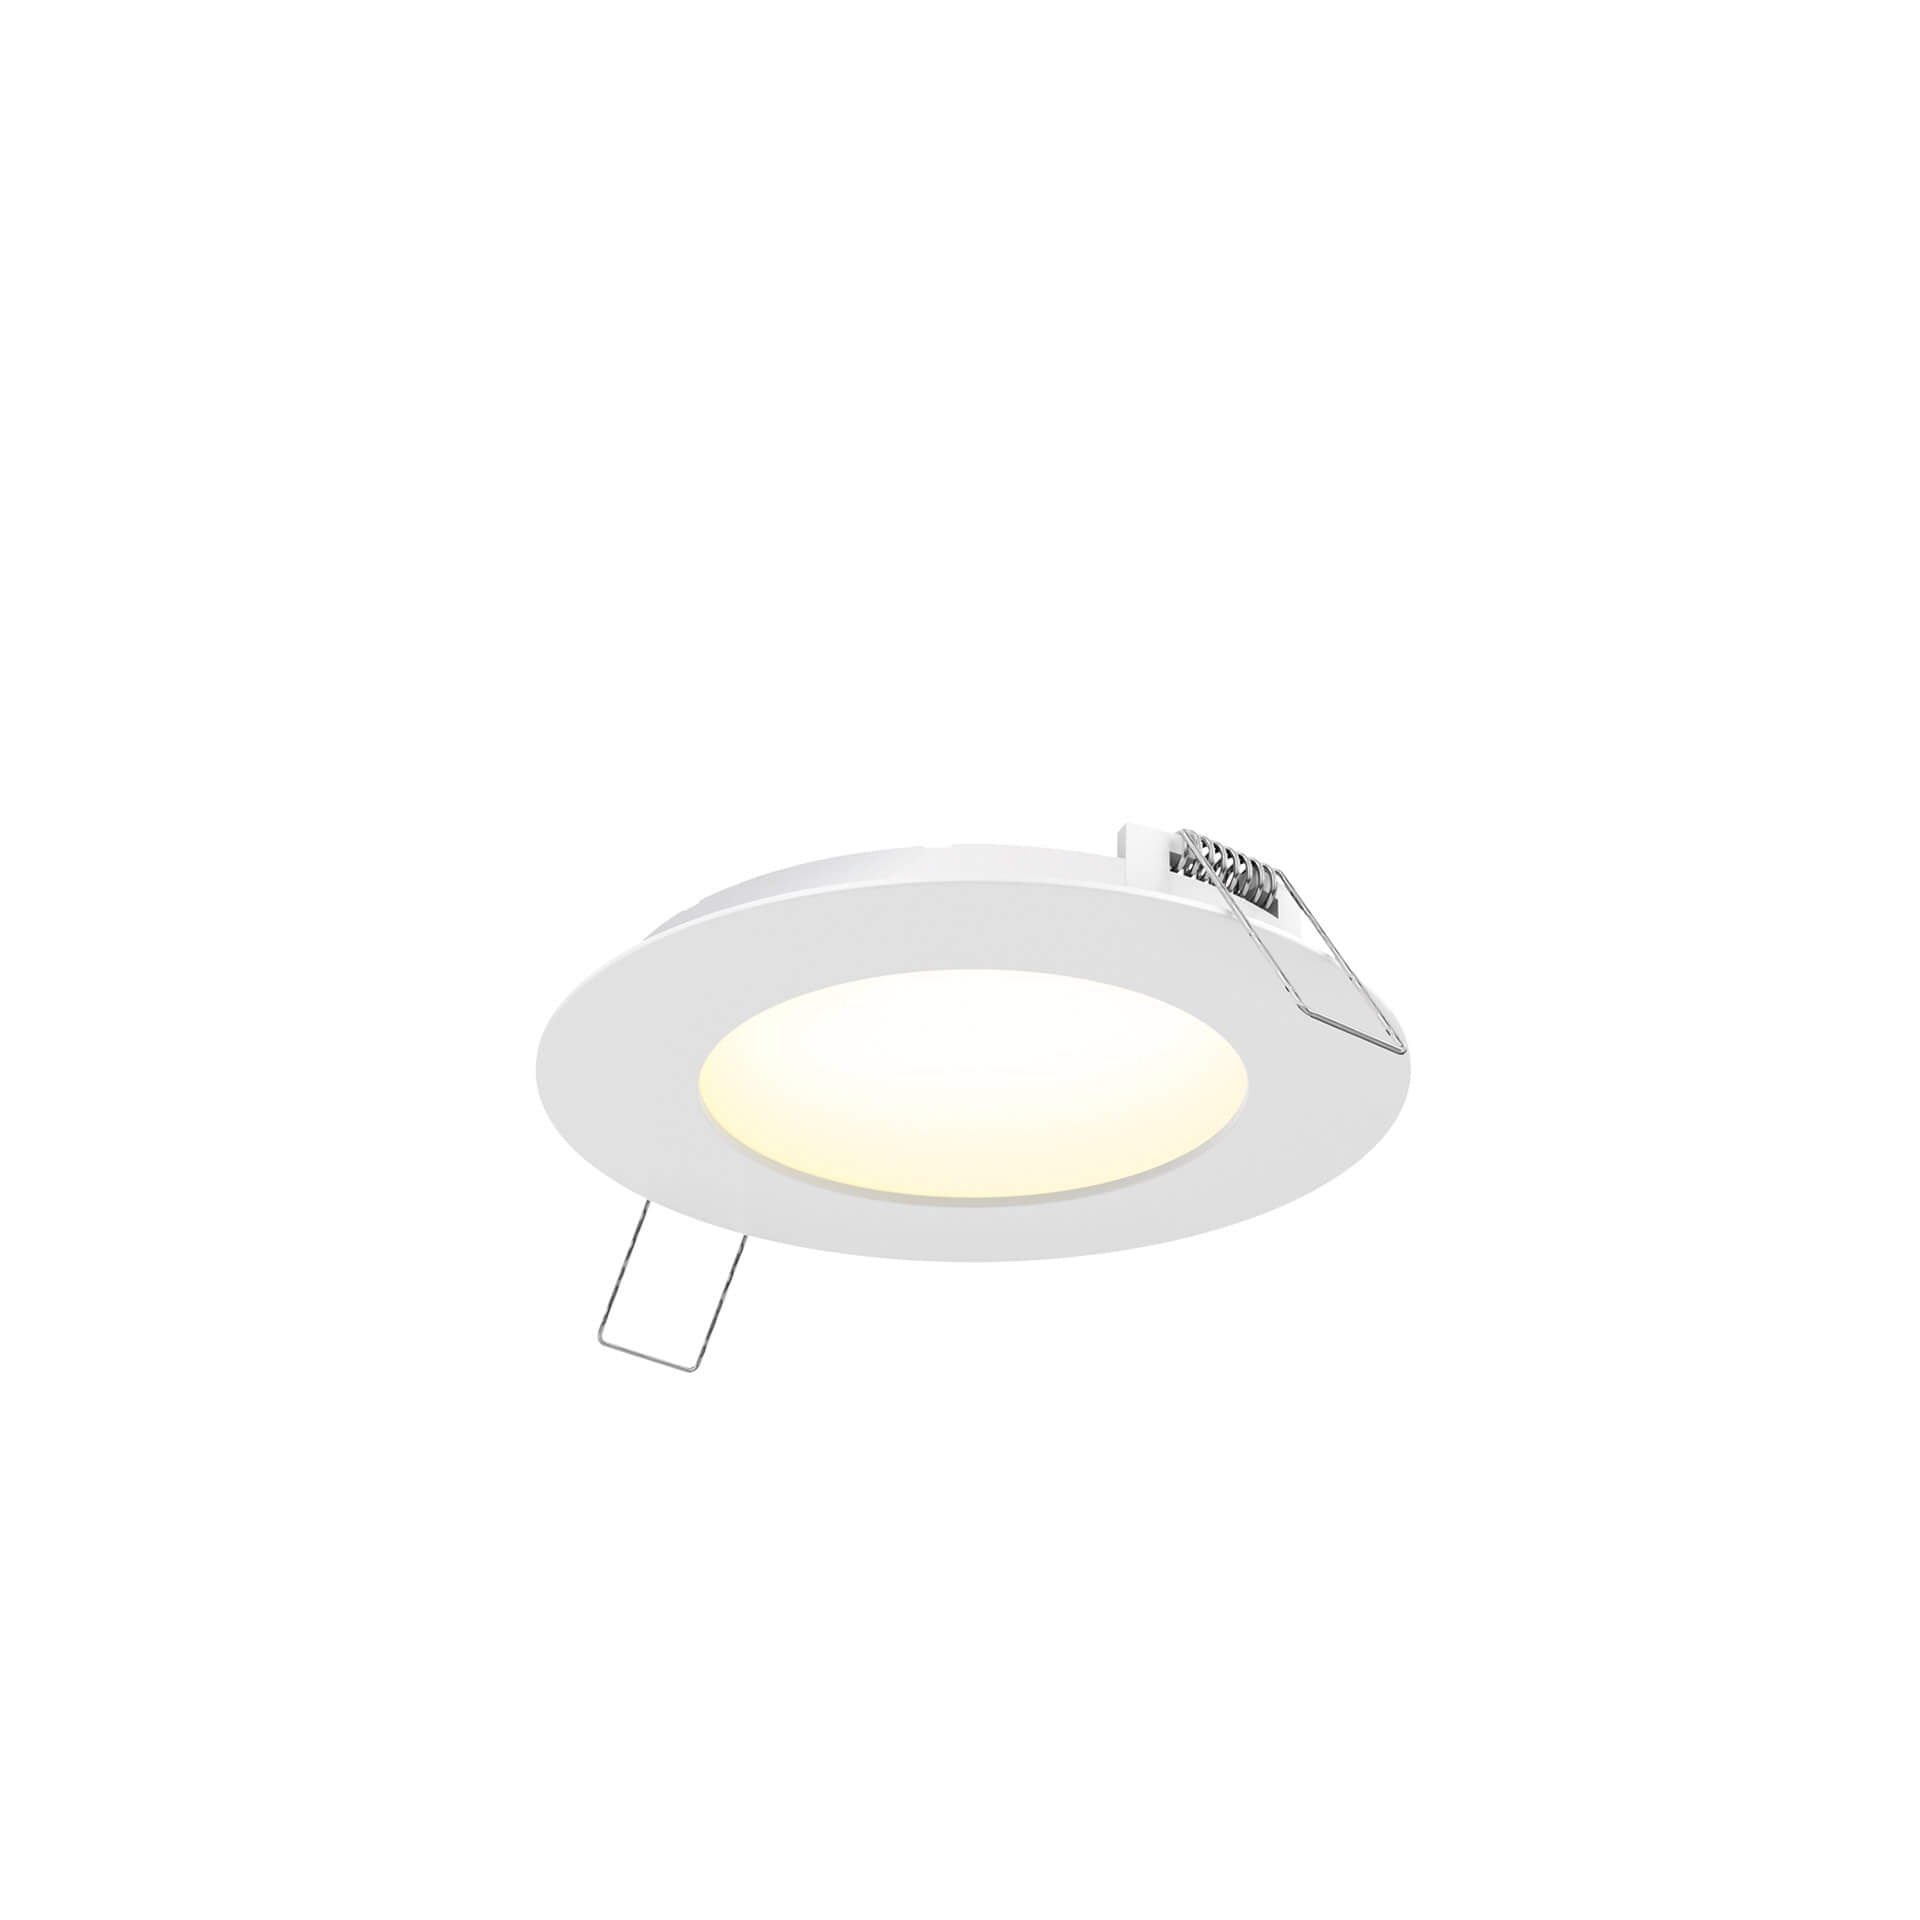 DALS Lighting RECESSED 4" Round Panel Light With Dim-To-Warm Technology